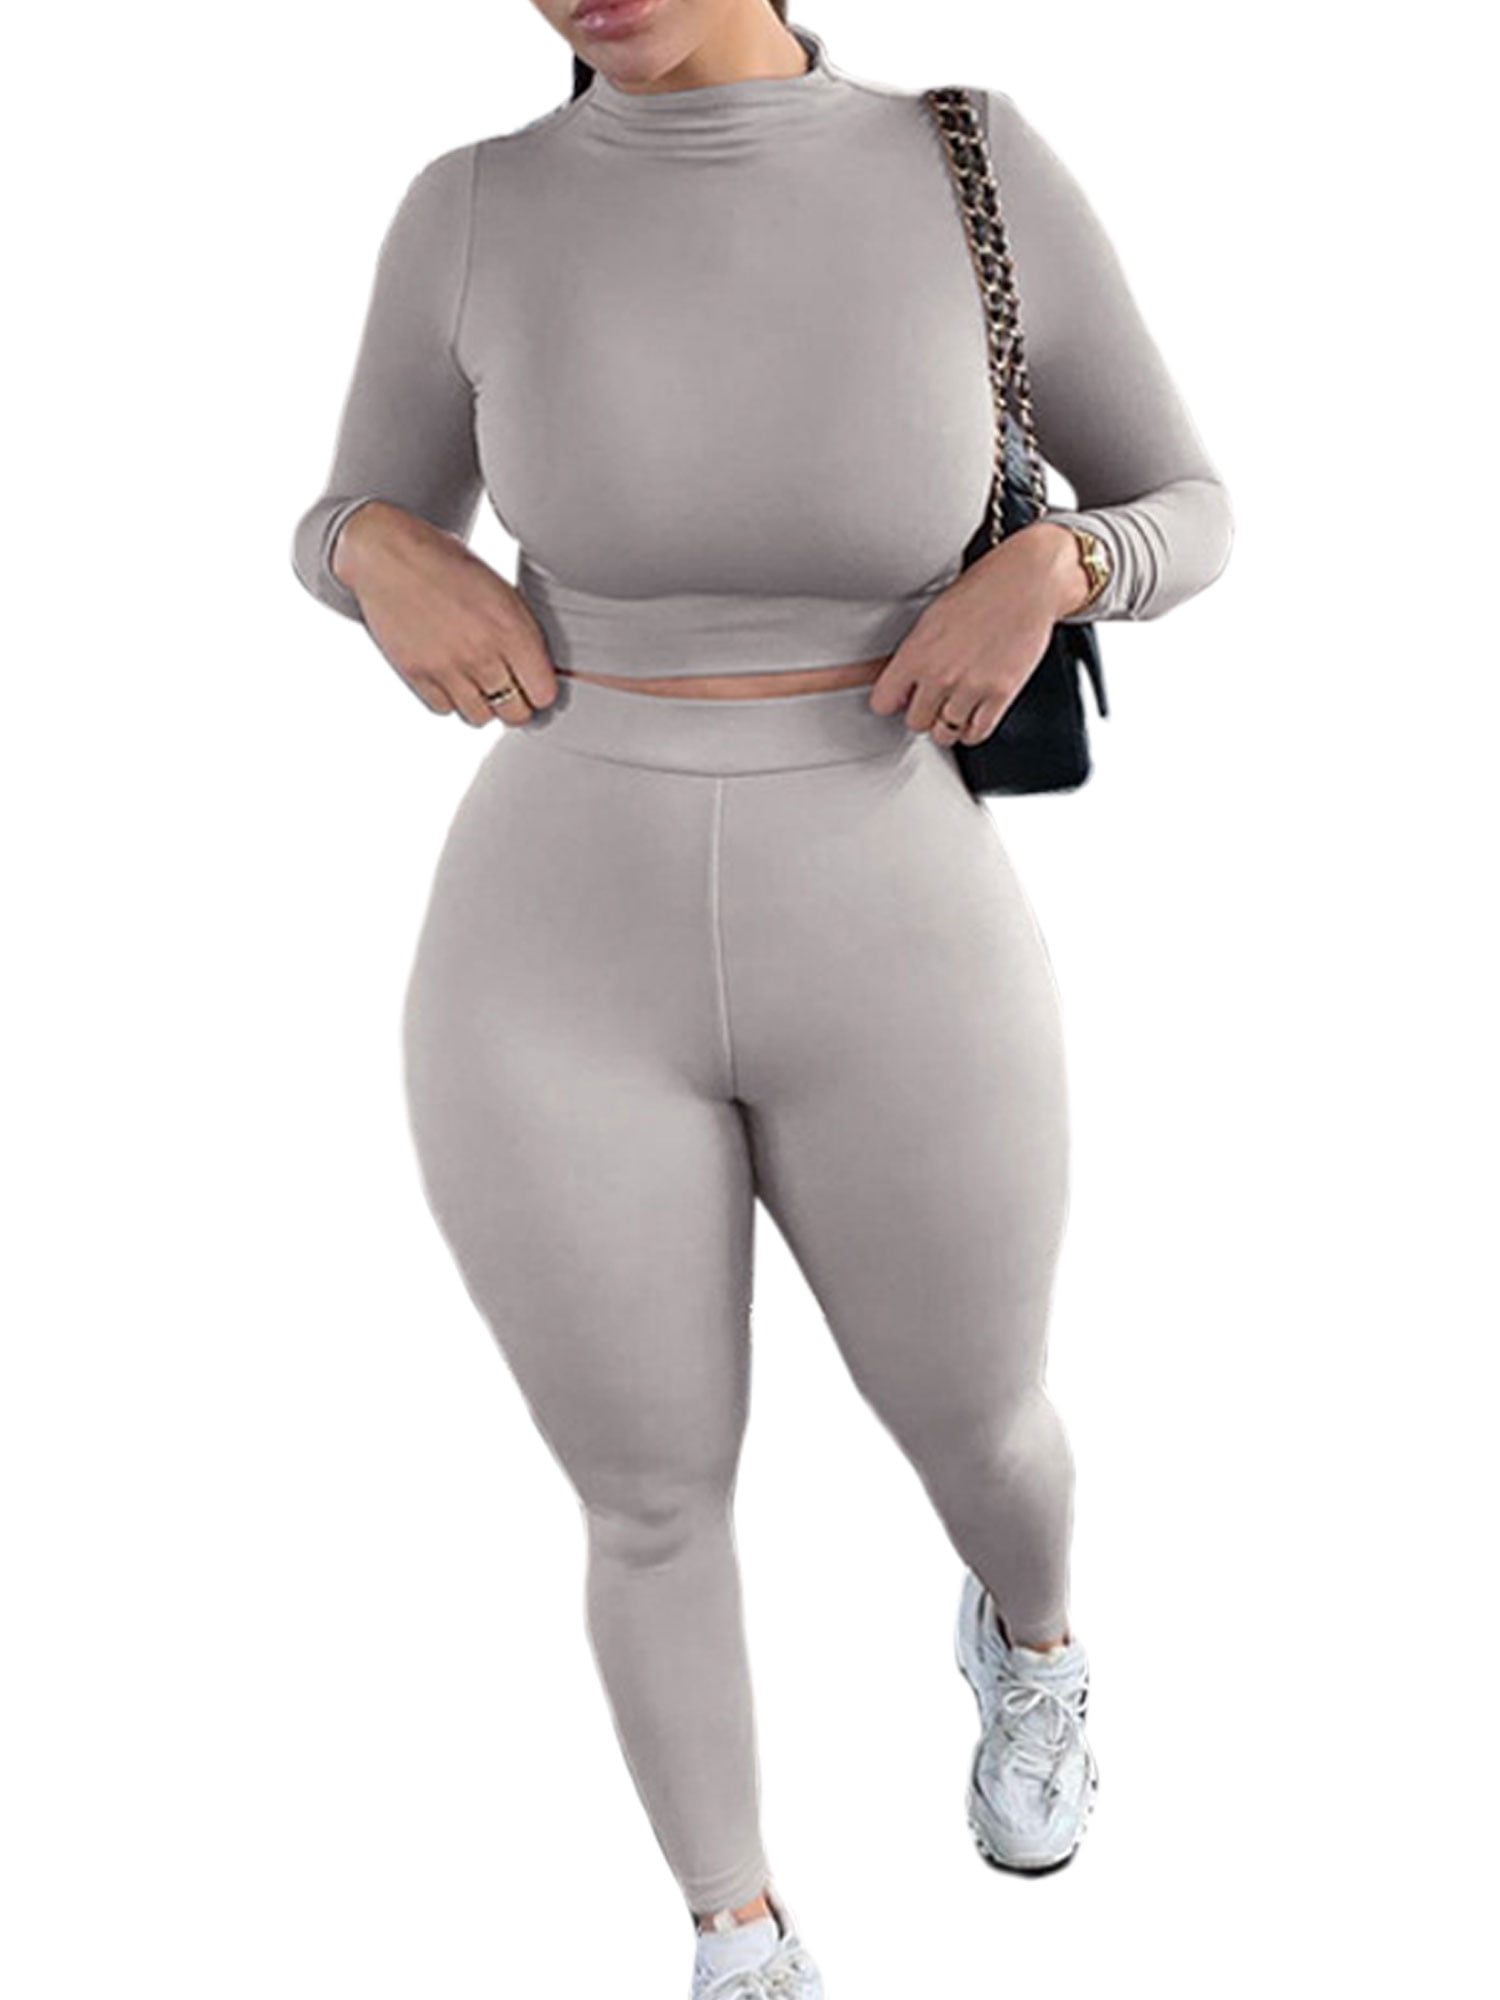 Workout Sets for Women 2 Piece Seamless Yoga Outfit Tracksuit